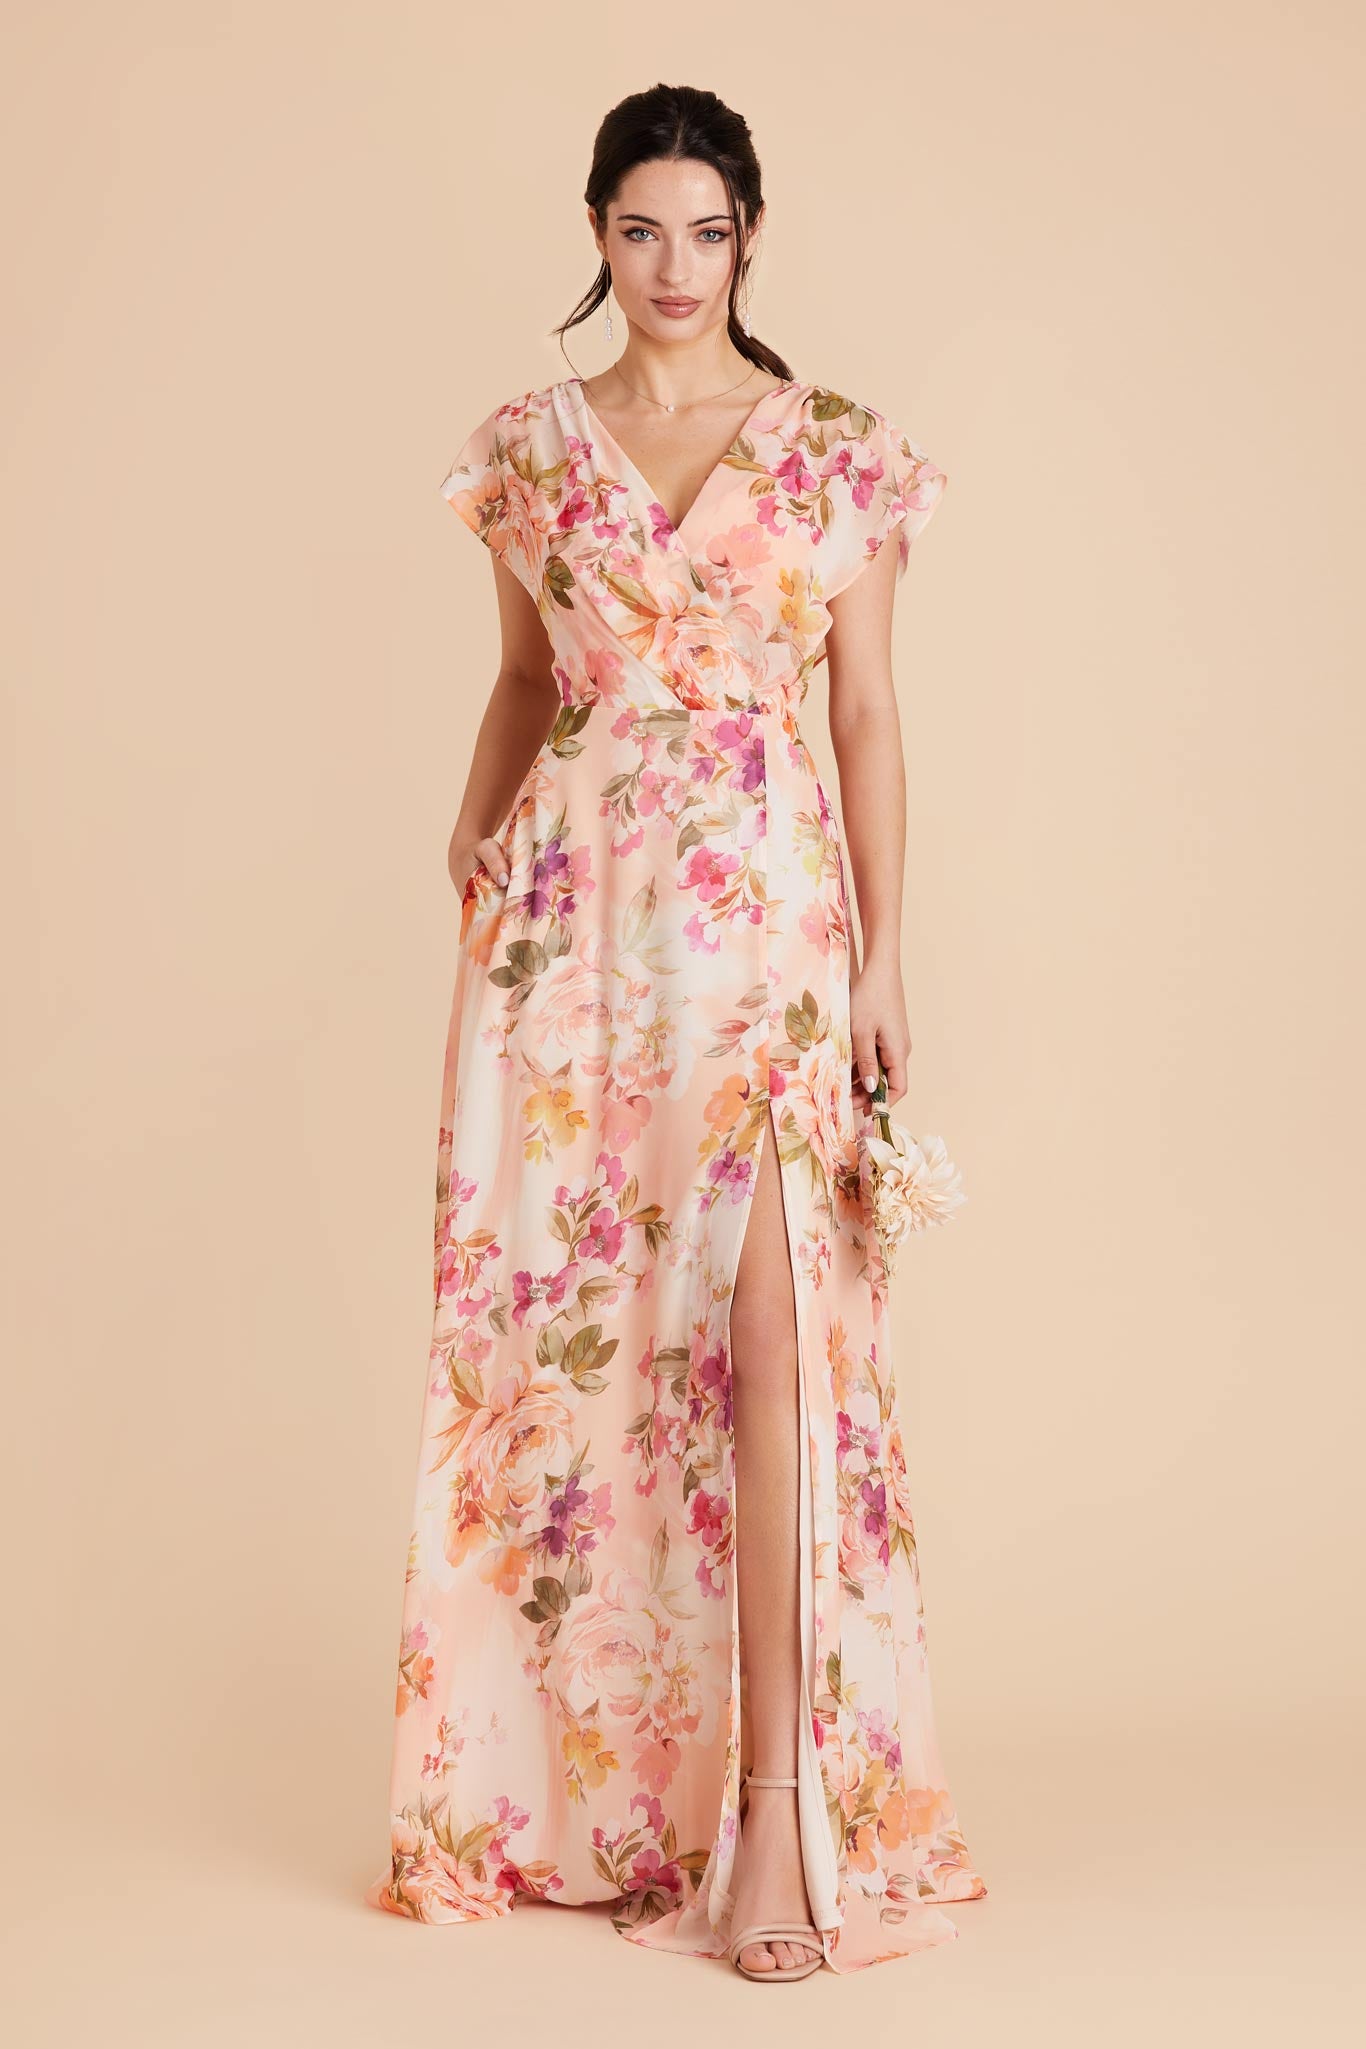 Coral Sunset Peonies Violet Chiffon Dress by Birdy Grey